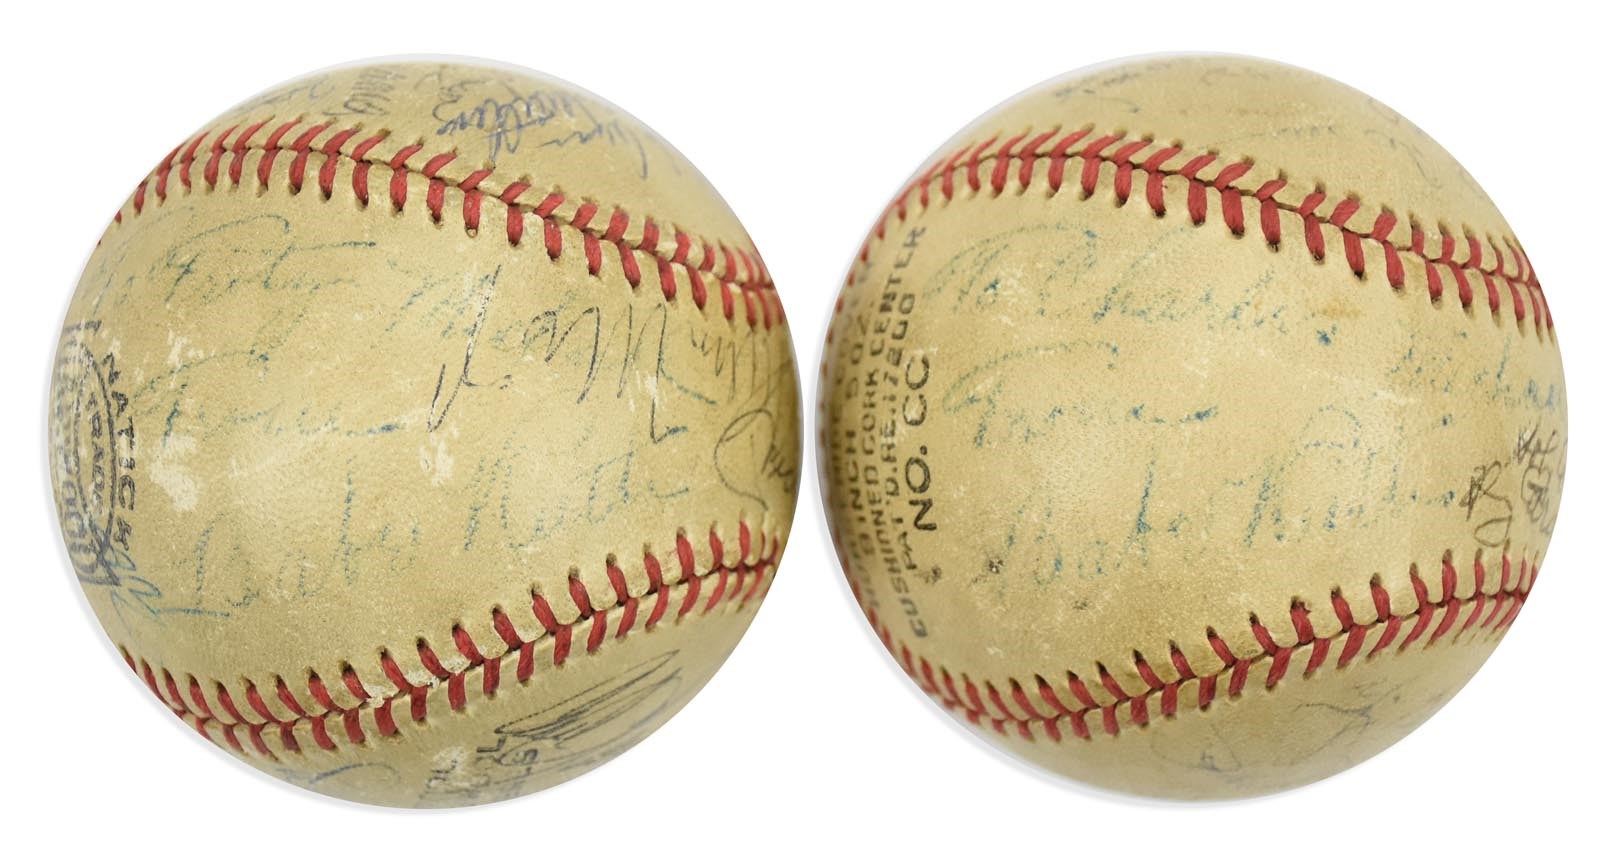 - Pair of Fantastic Babe Ruth & HOFers Signed Baseballs from the Same Family (PSA)